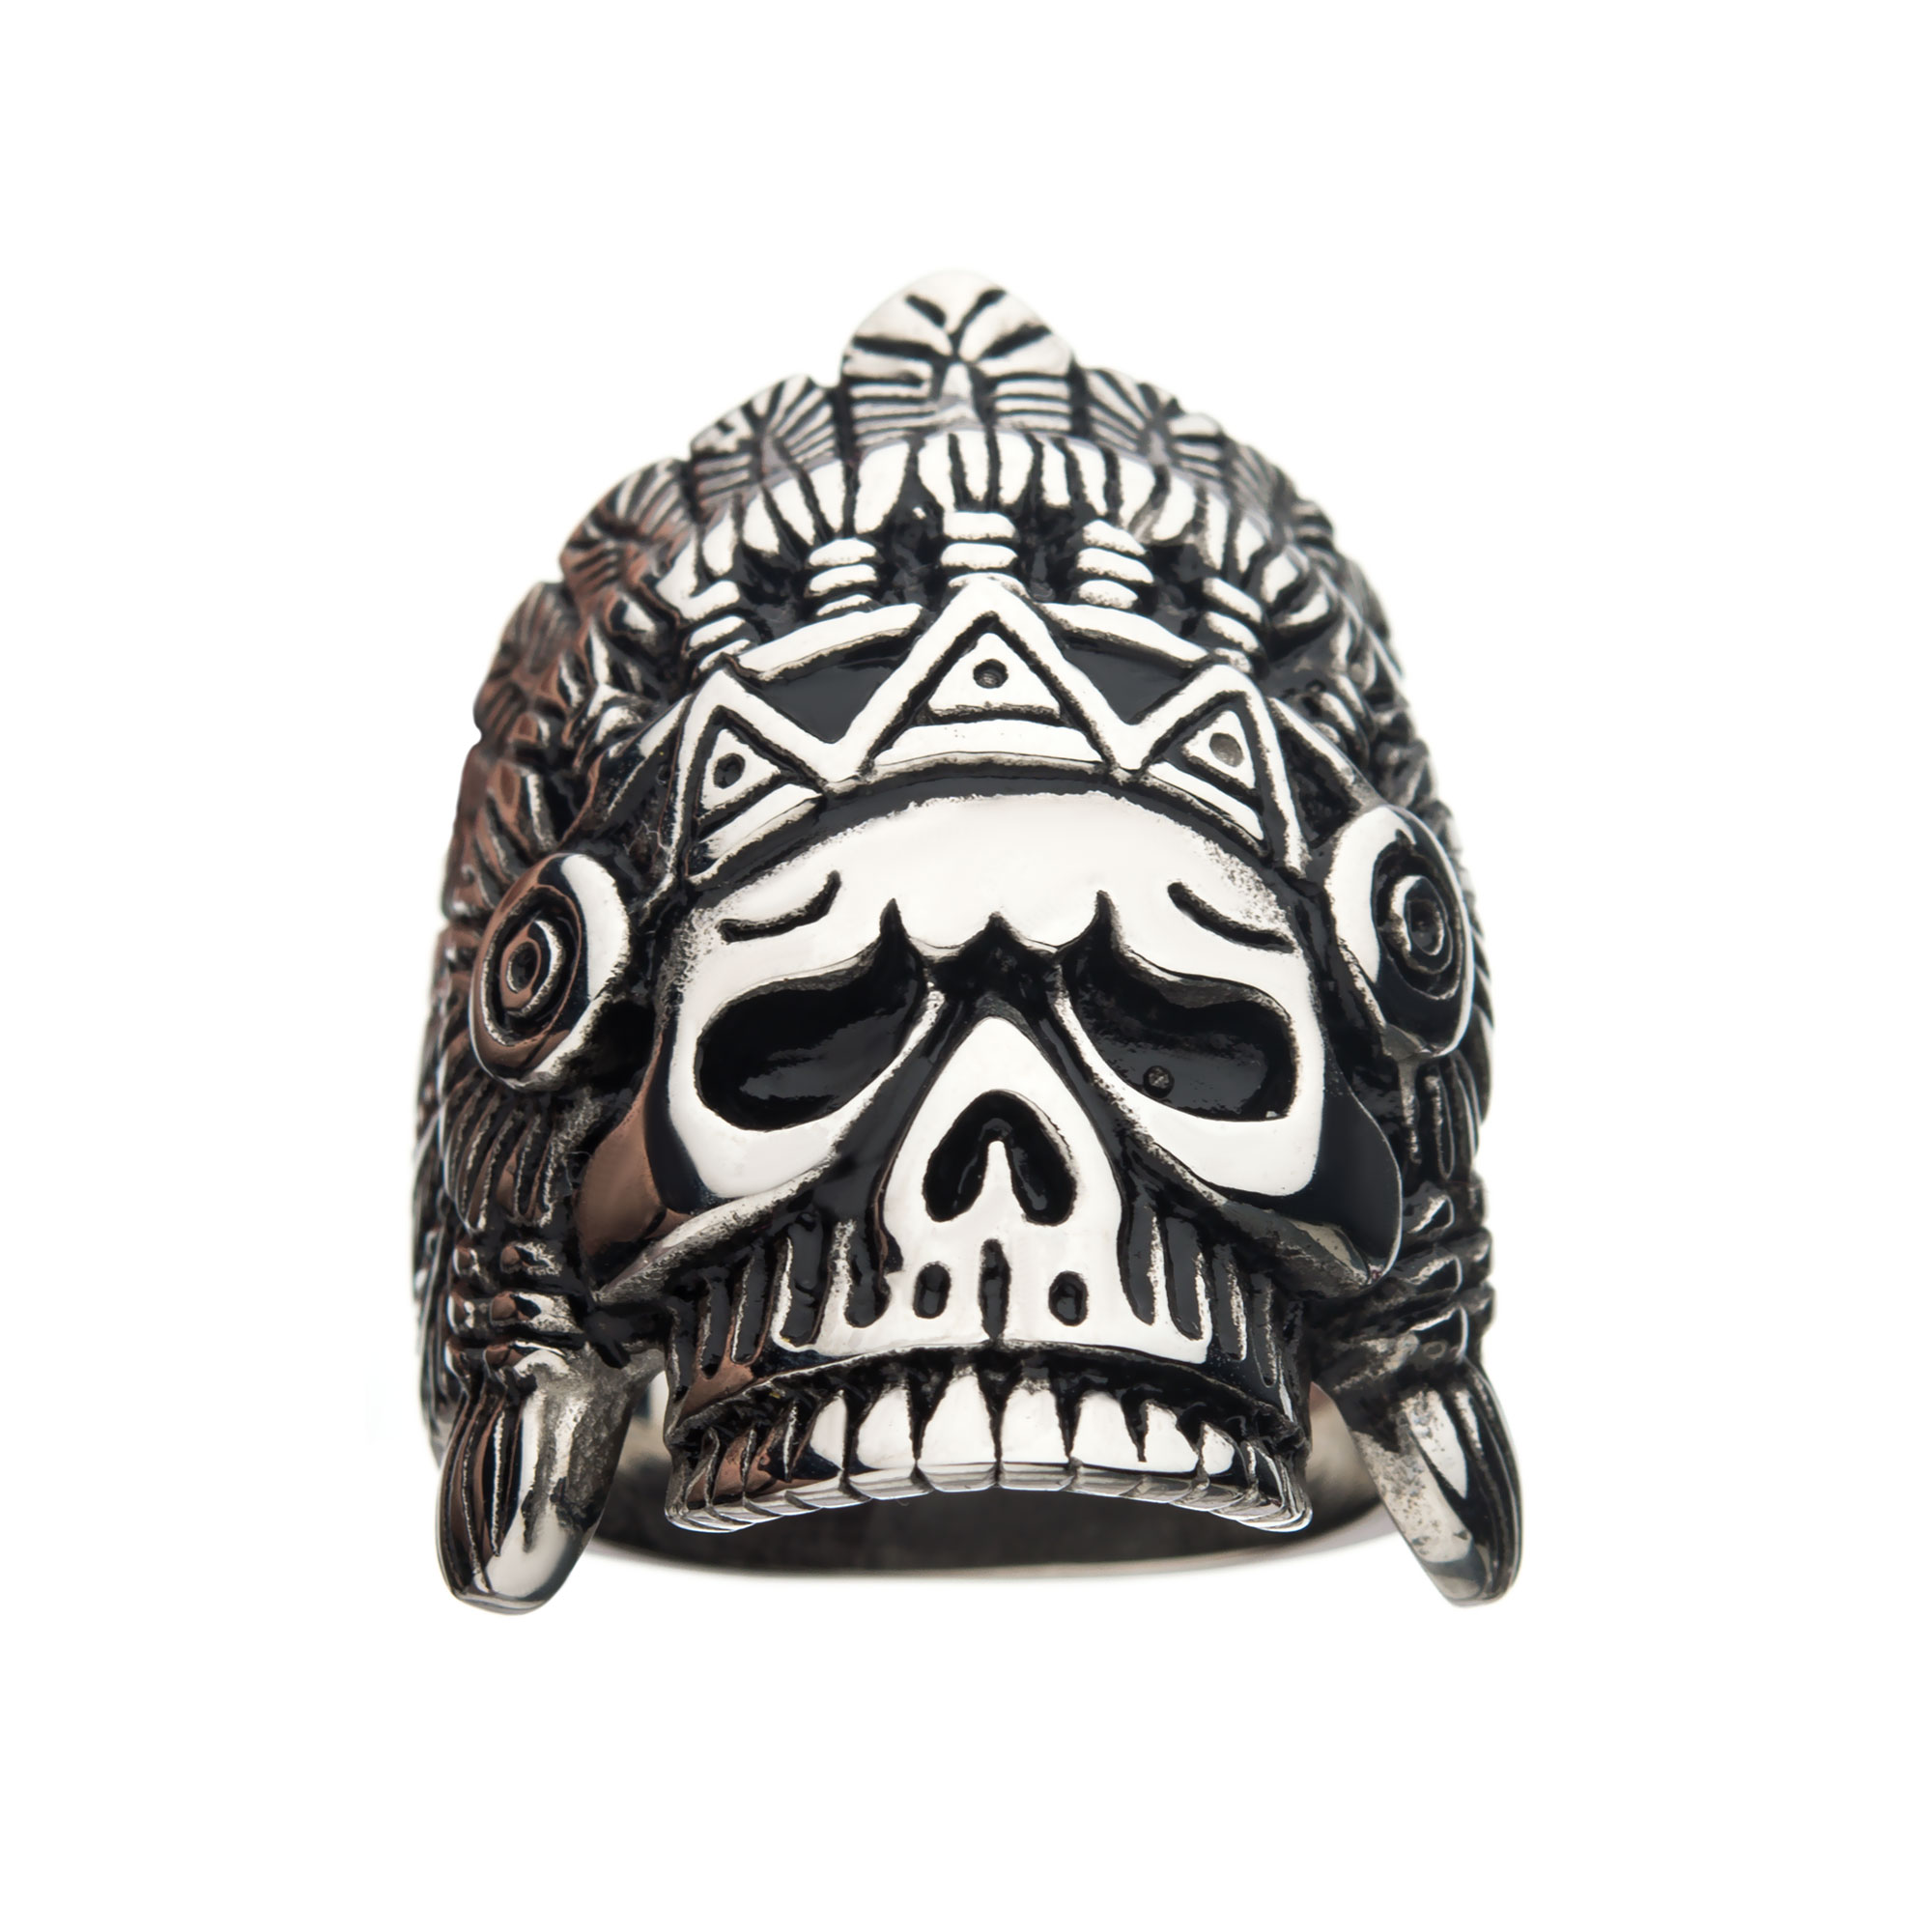 Oxidized Stainless Steel Chief Skull Ring Image 2 Selman's Jewelers-Gemologist McComb, MS